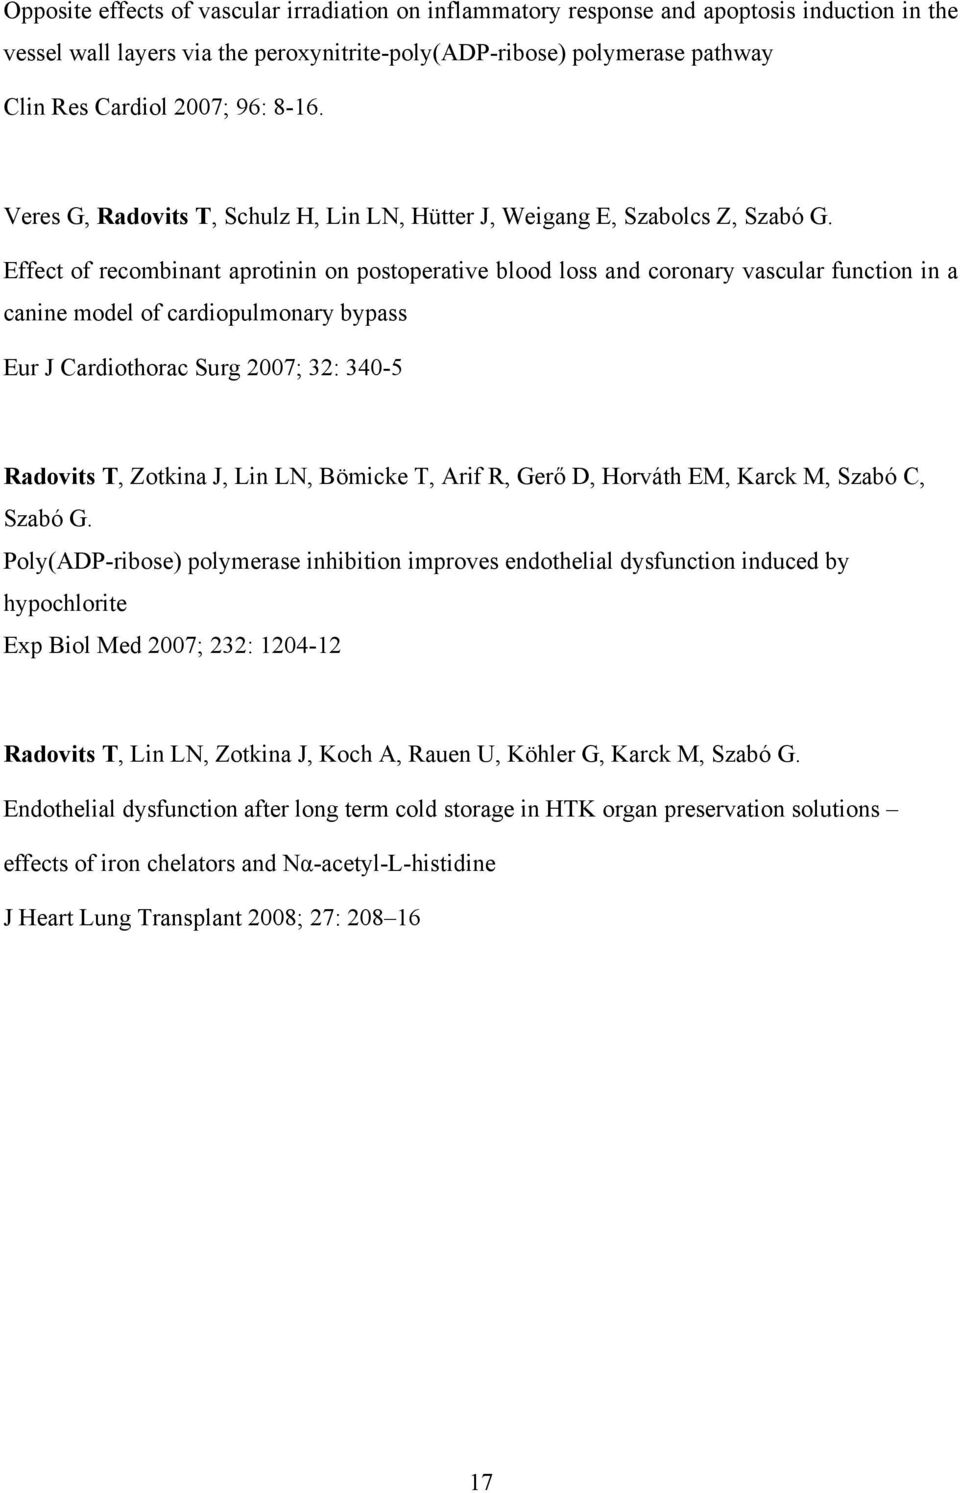 Effect of recombinant aprotinin on postoperative blood loss and coronary vascular function in a canine model of cardiopulmonary bypass Eur J Cardiothorac Surg 2007; 32: 340-5 Radovits T, Zotkina J,